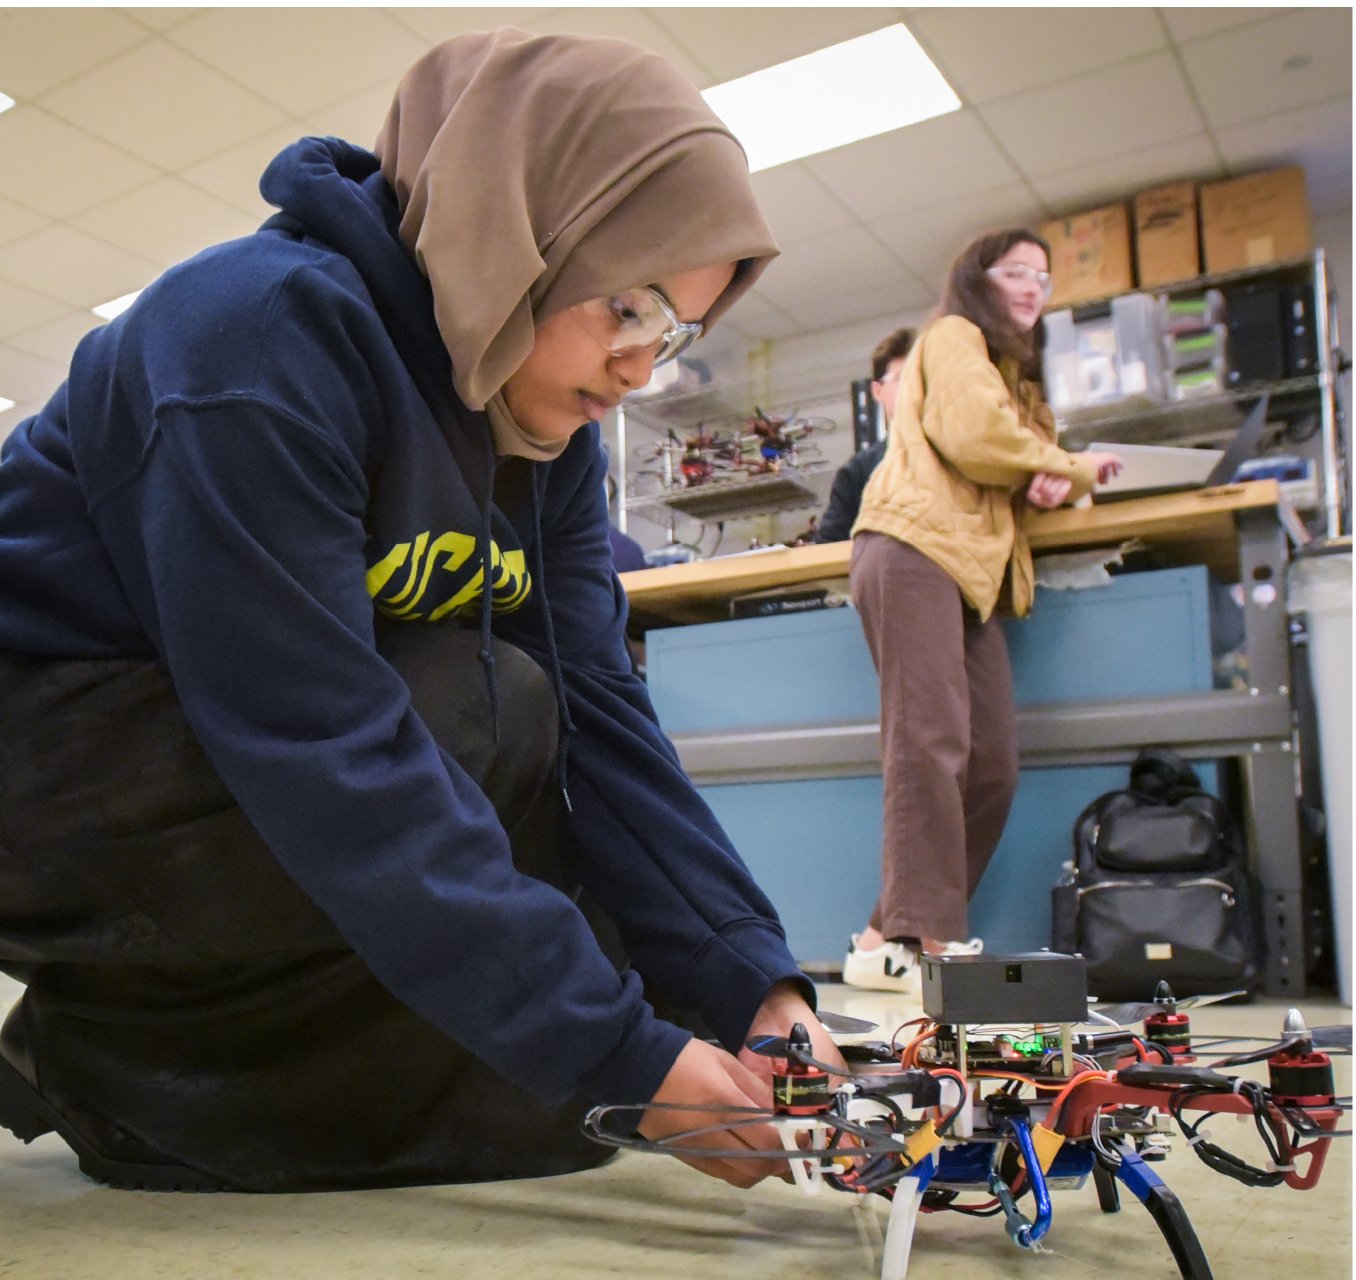 Student wearing hijab kneeling on ground working on drone